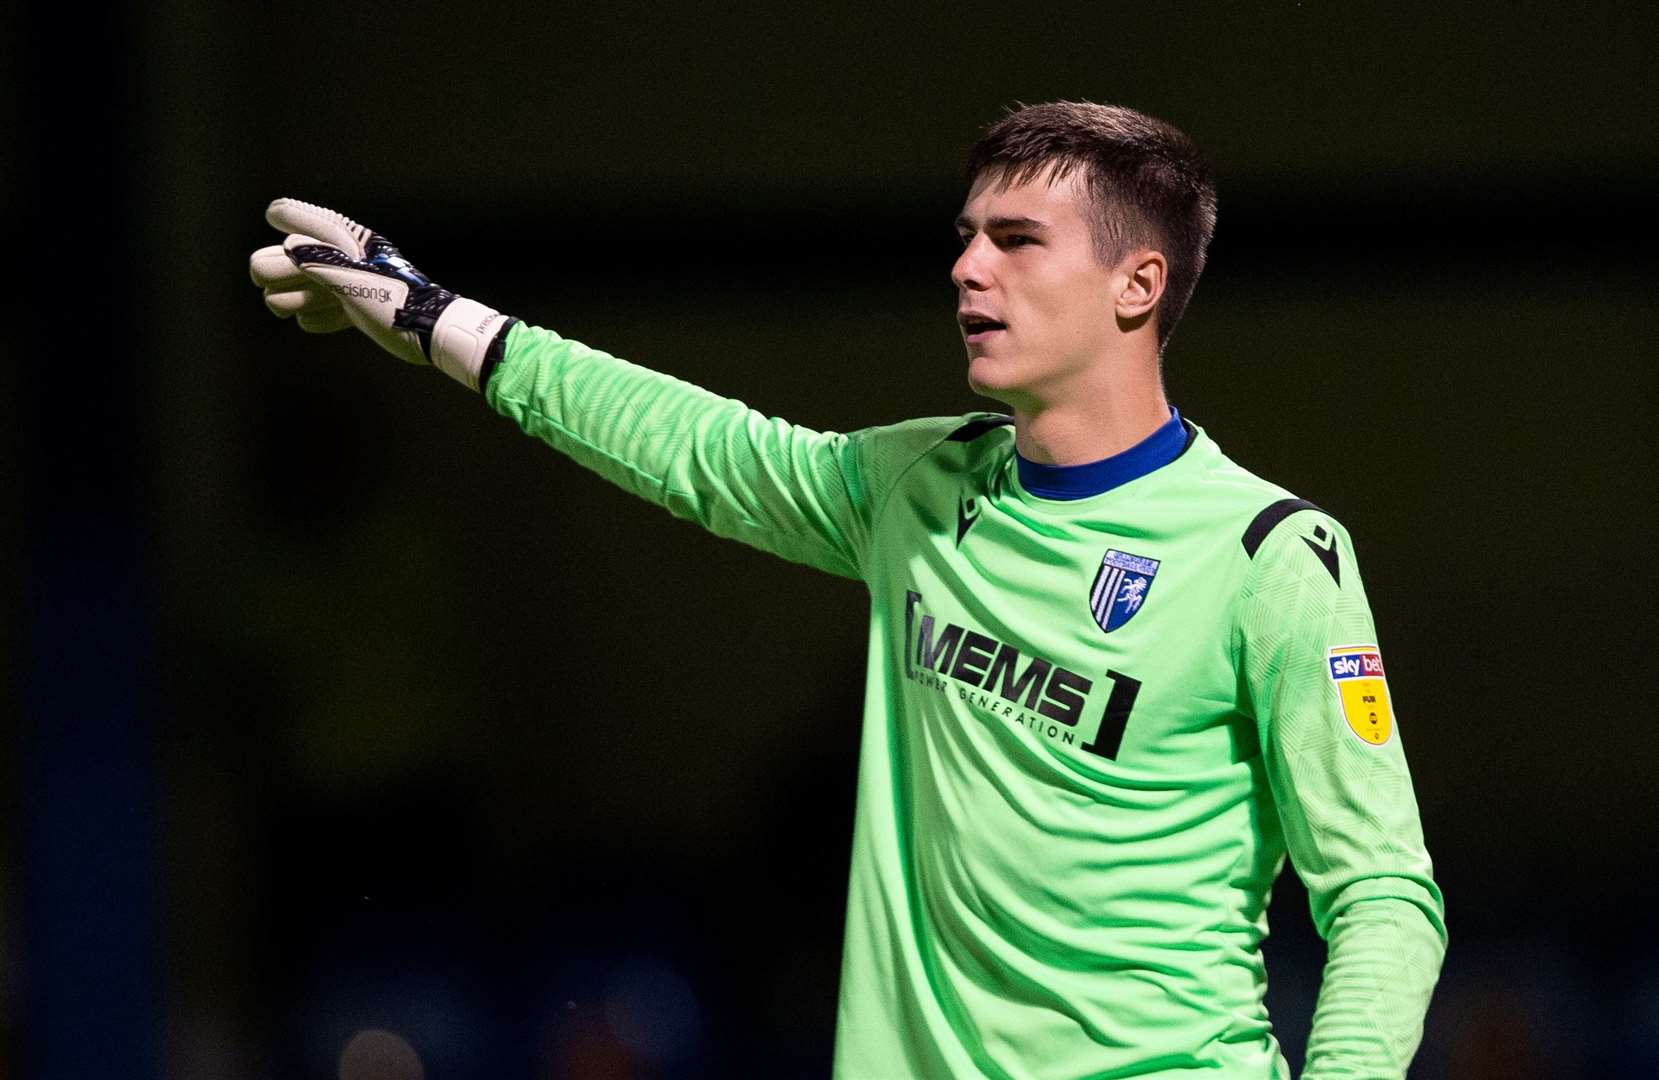 Gillingham's former goalkeeper Joe Walsh is set to play against them for Accrington after extending loan from QPR this week